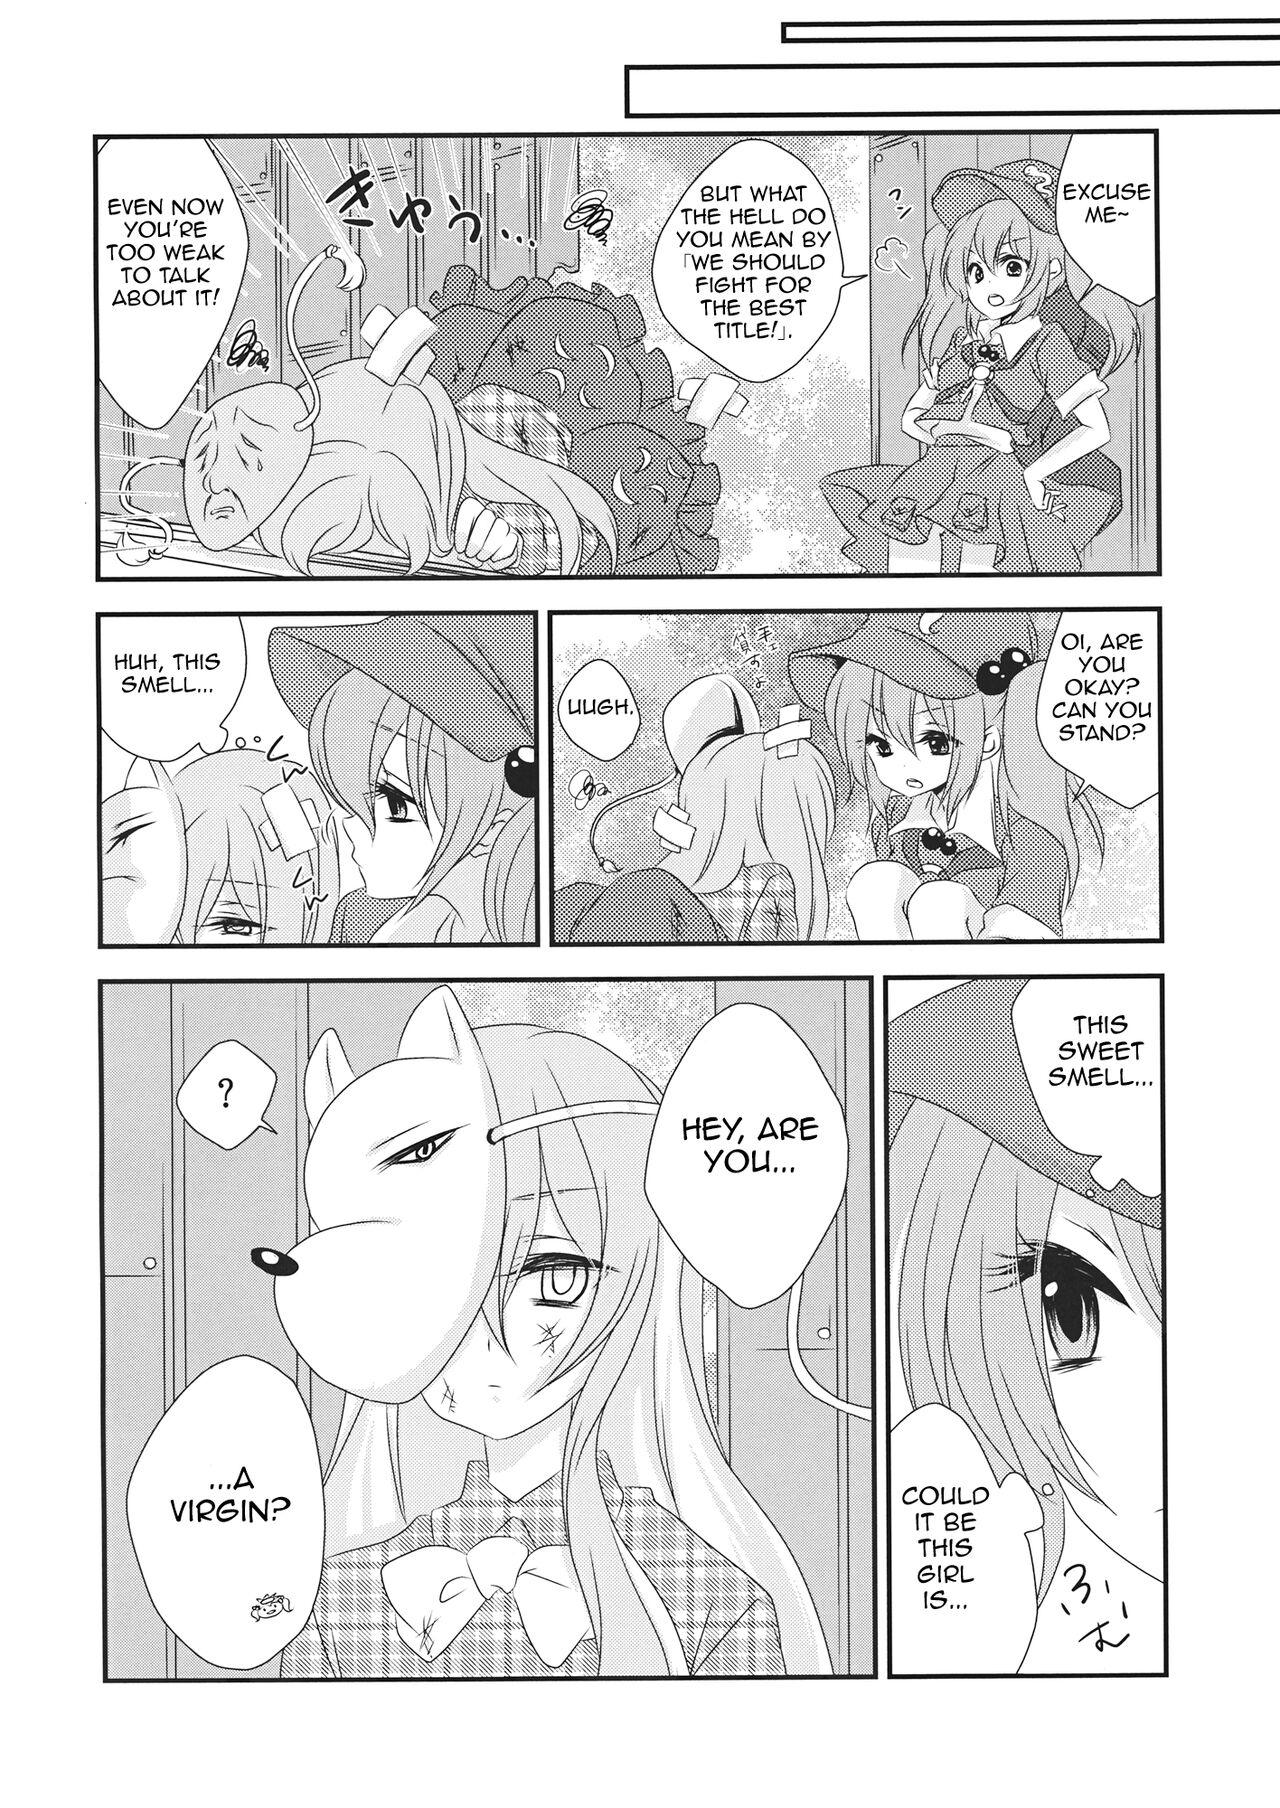 Gay Clinic Yome to Musume ga Kawai sugite Watashi wa mou Genkai kamo shirenai | My wife and daughter are too cute, I might be at my limit. - Touhou project Shaved Pussy - Page 3